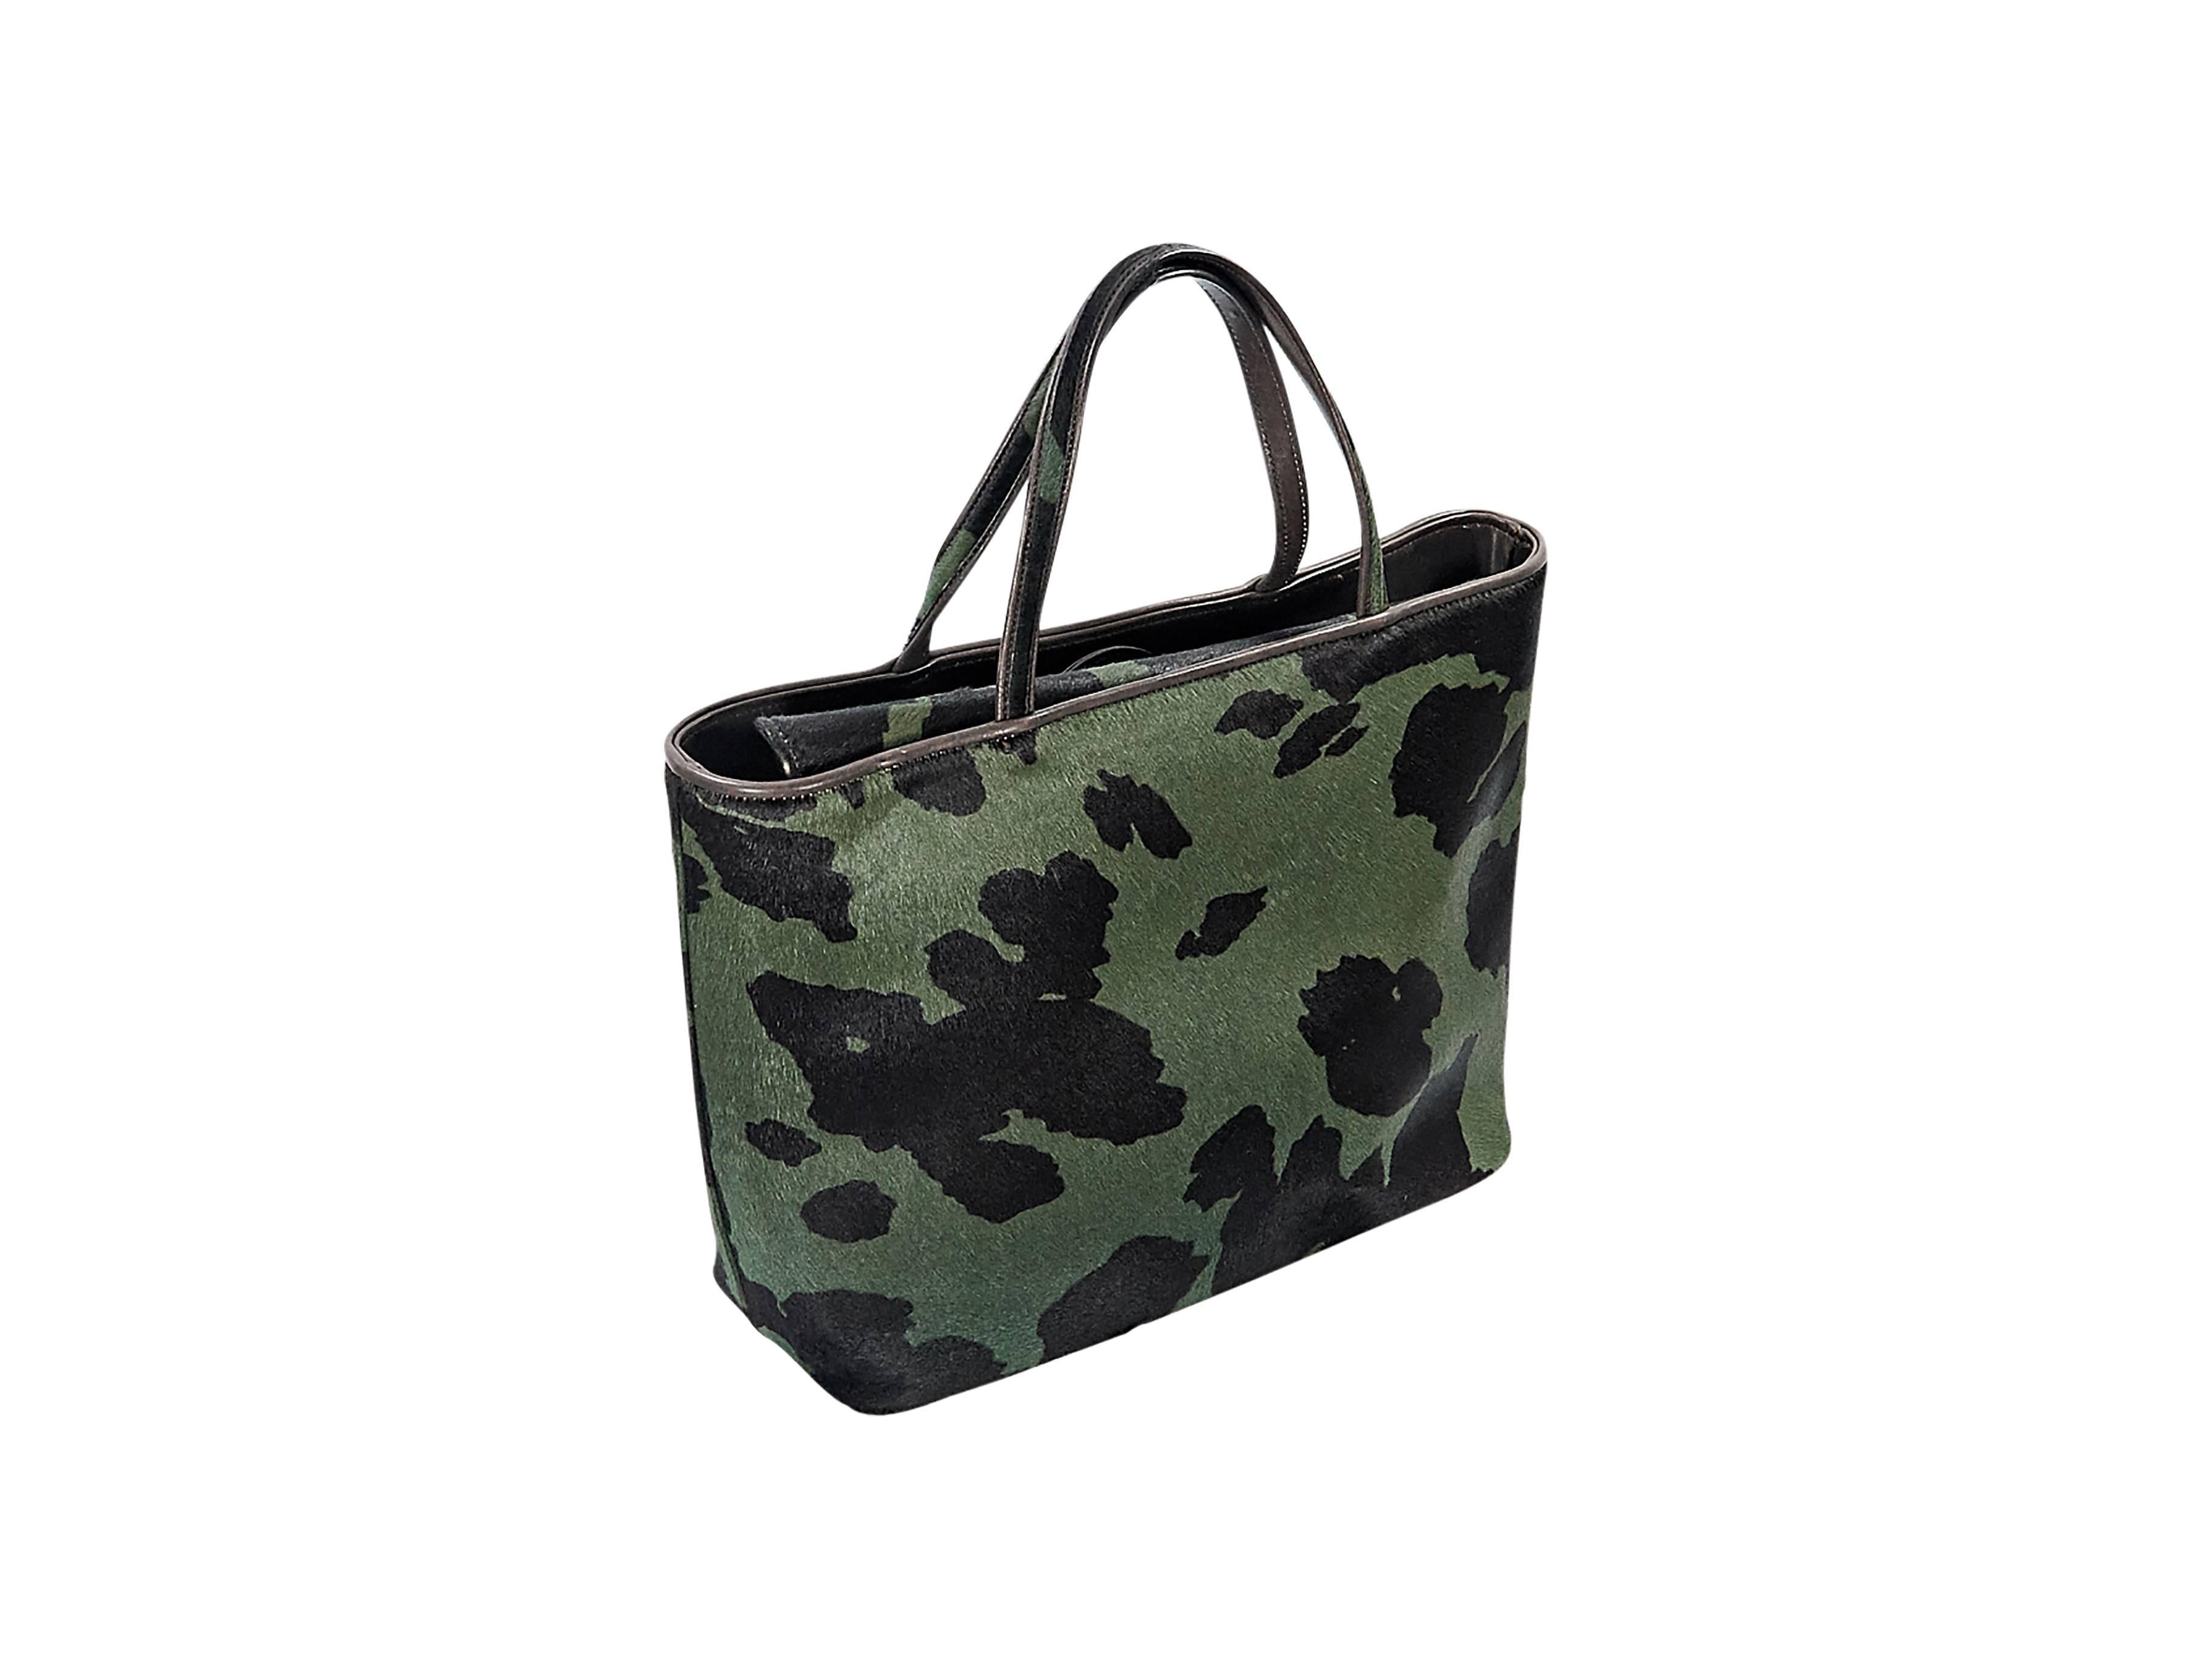 Product details:  Green and black printed pony hair tote bag by Jimmy Choo.  Dual carry handles.  Magnetic snap closure.  Lined interior with inner zip pocket.  Protective metal feet.  Silvertone hardware.  14